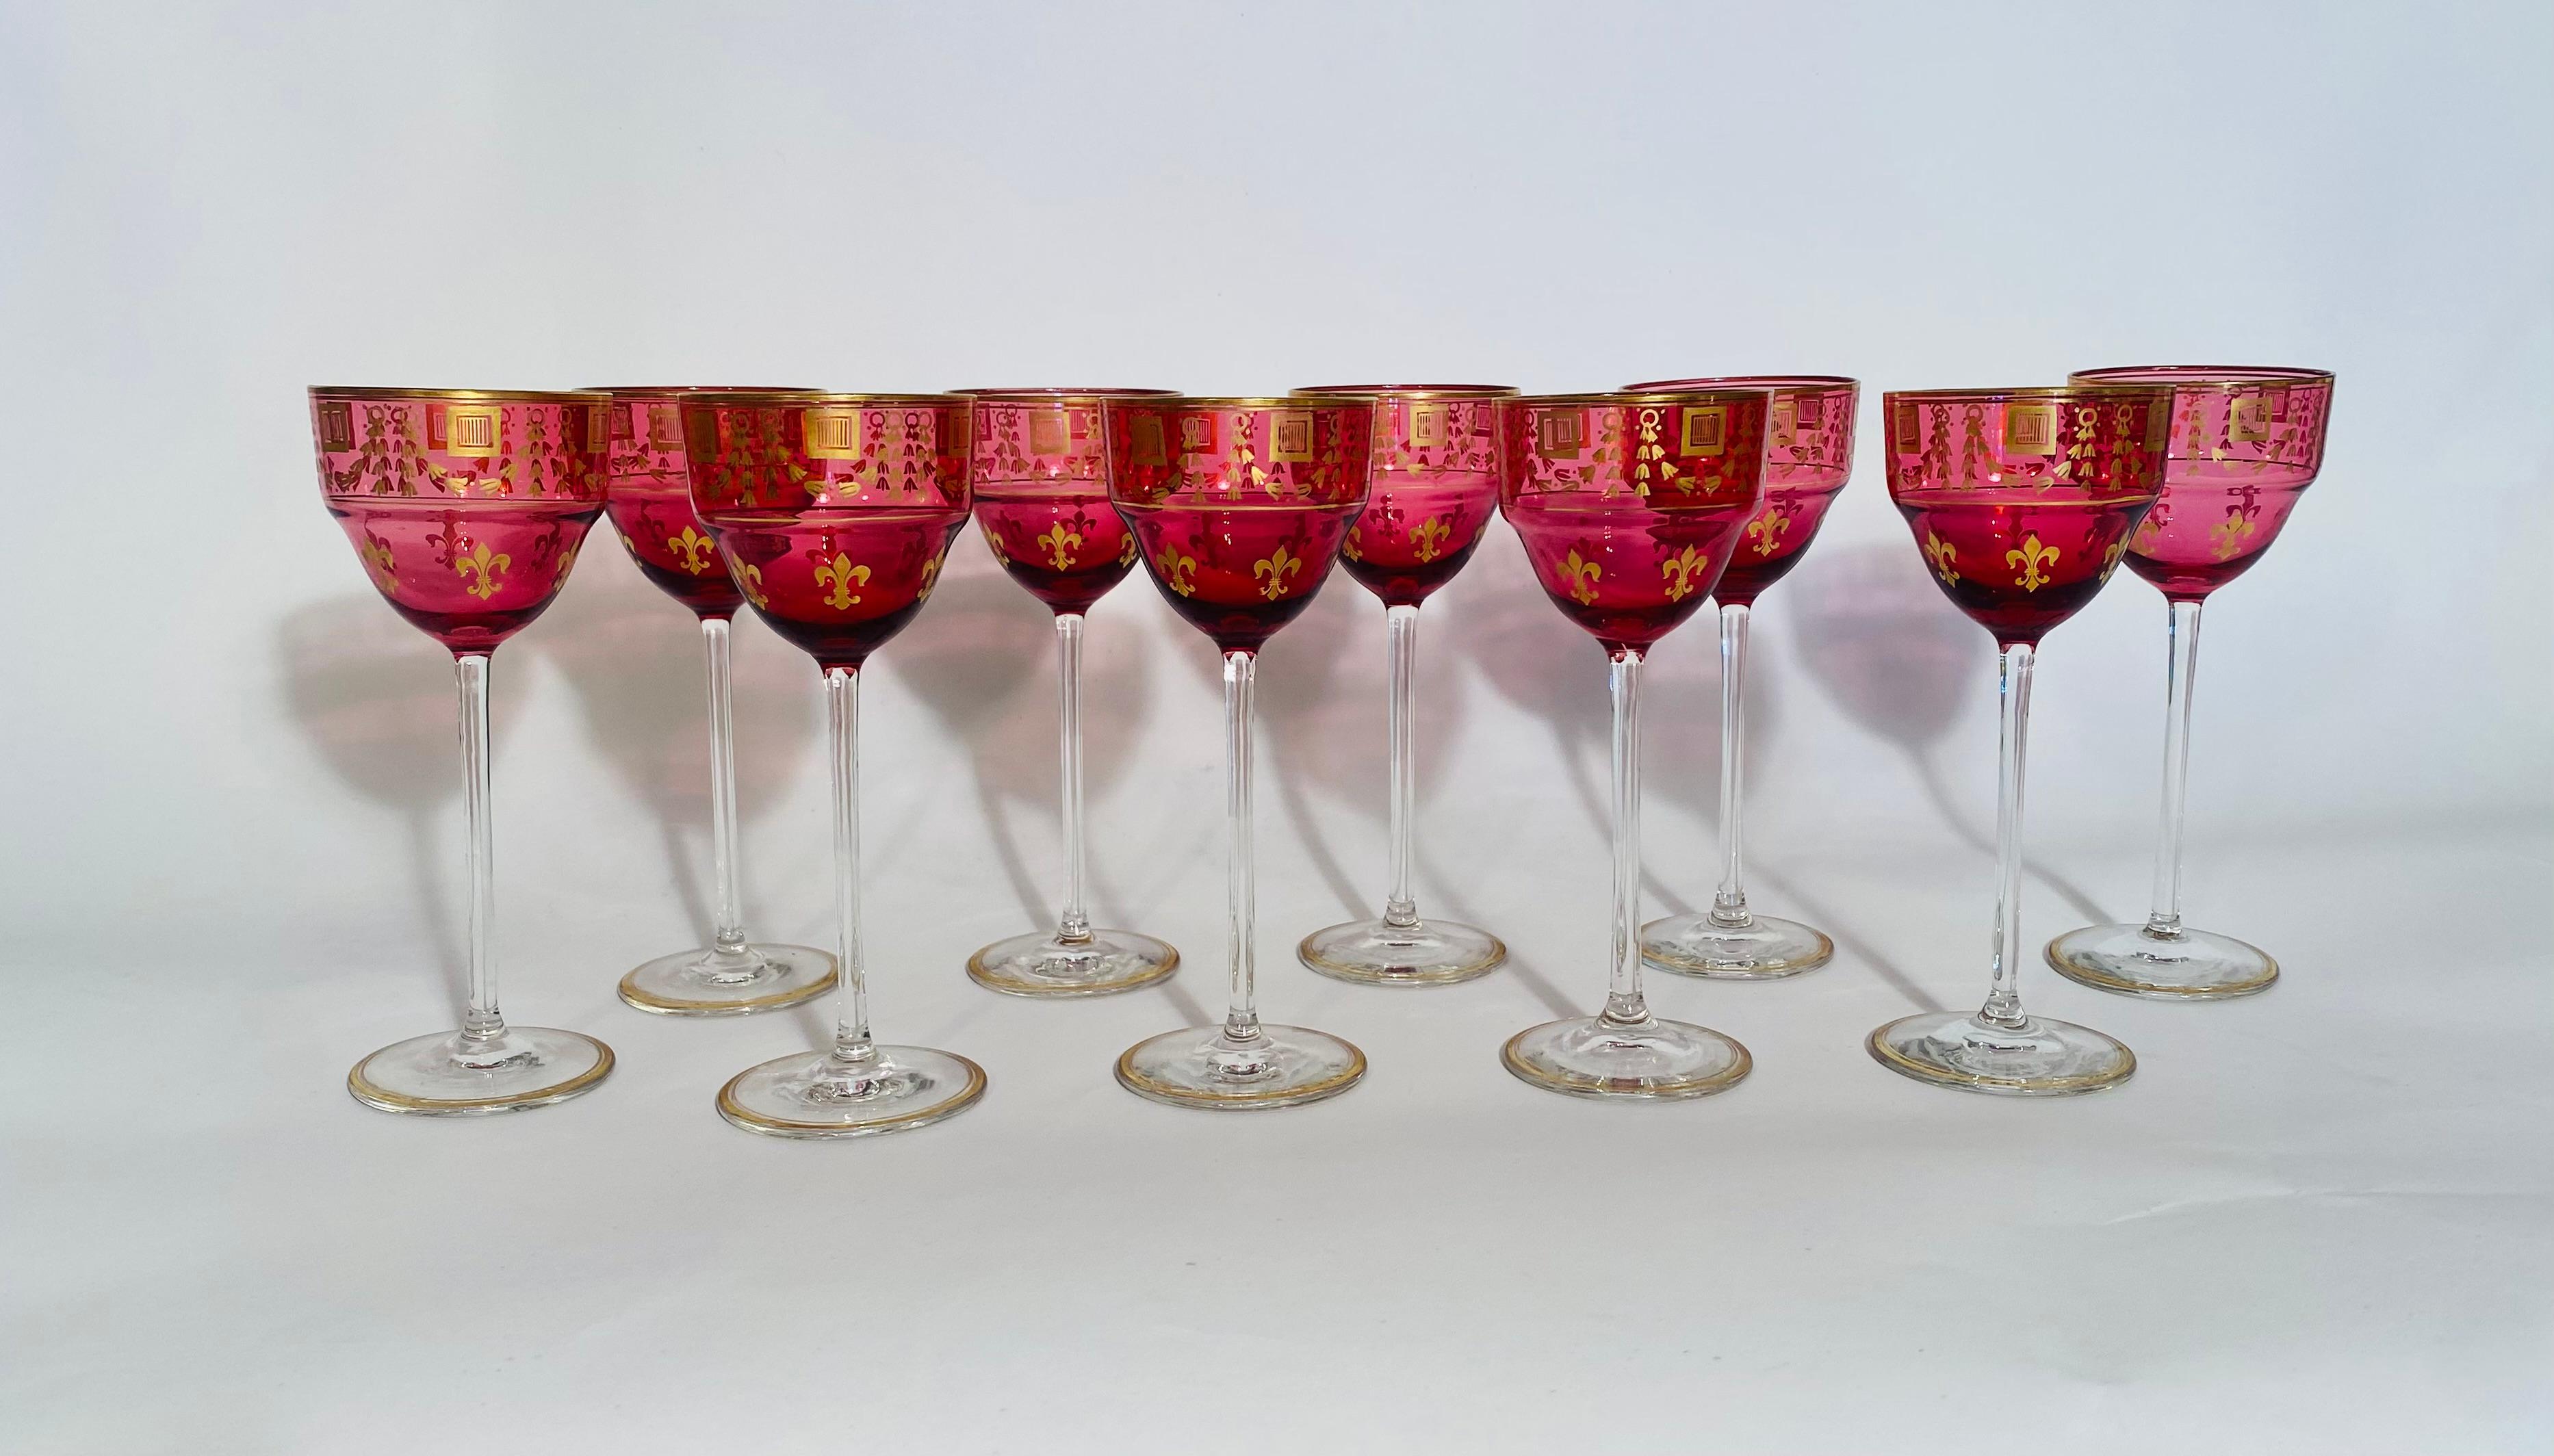 A Set of 10 Ruby Gilt Wine Glasses, Antique French Circa 1900. Fleur de Lis  In Good Condition For Sale In West Palm Beach, FL